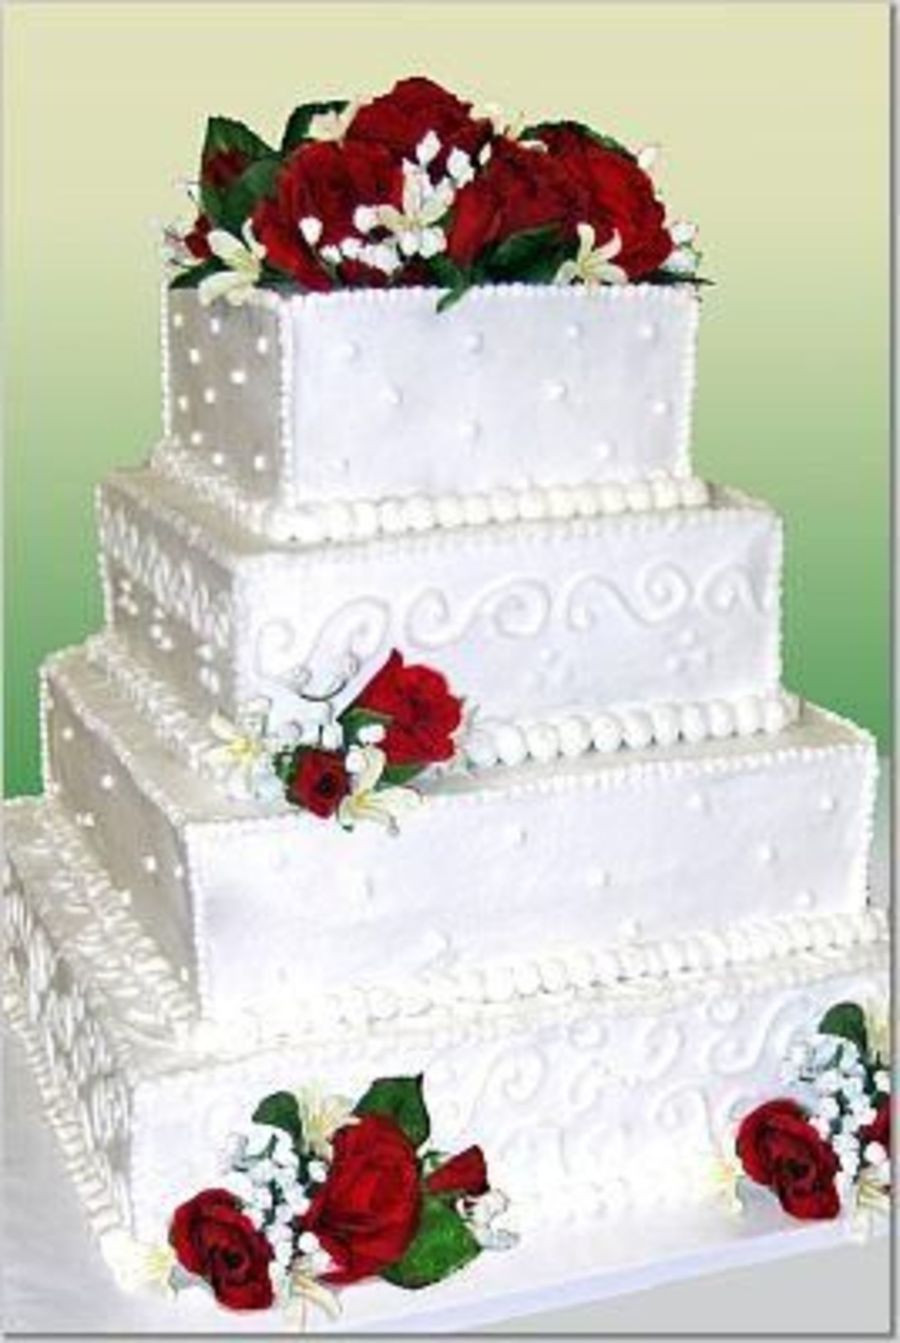 White Wedding Cake With Red Roses
 White Square Wedding Cake With Red Roses CakeCentral